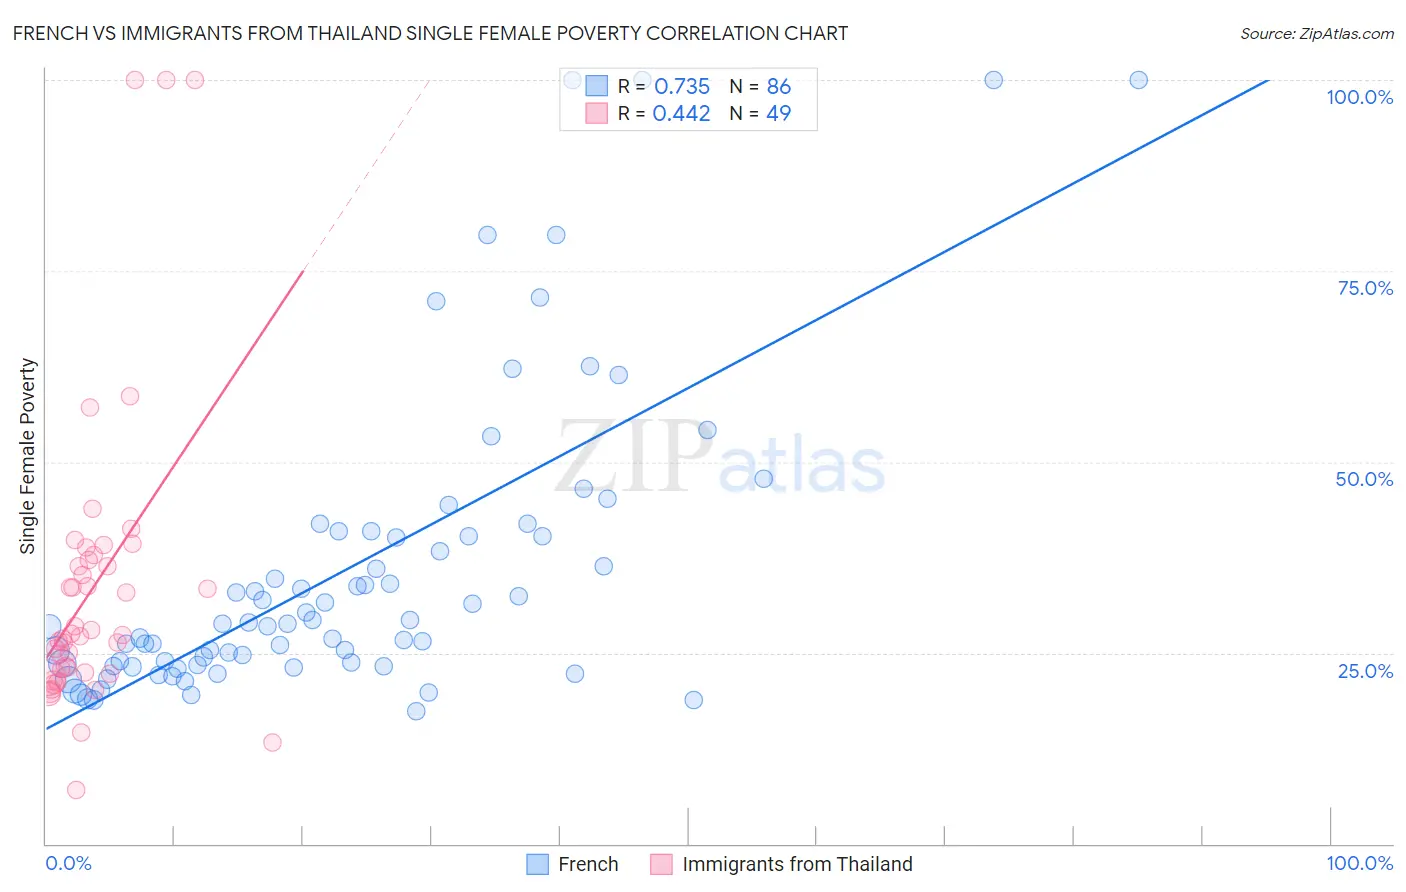 French vs Immigrants from Thailand Single Female Poverty